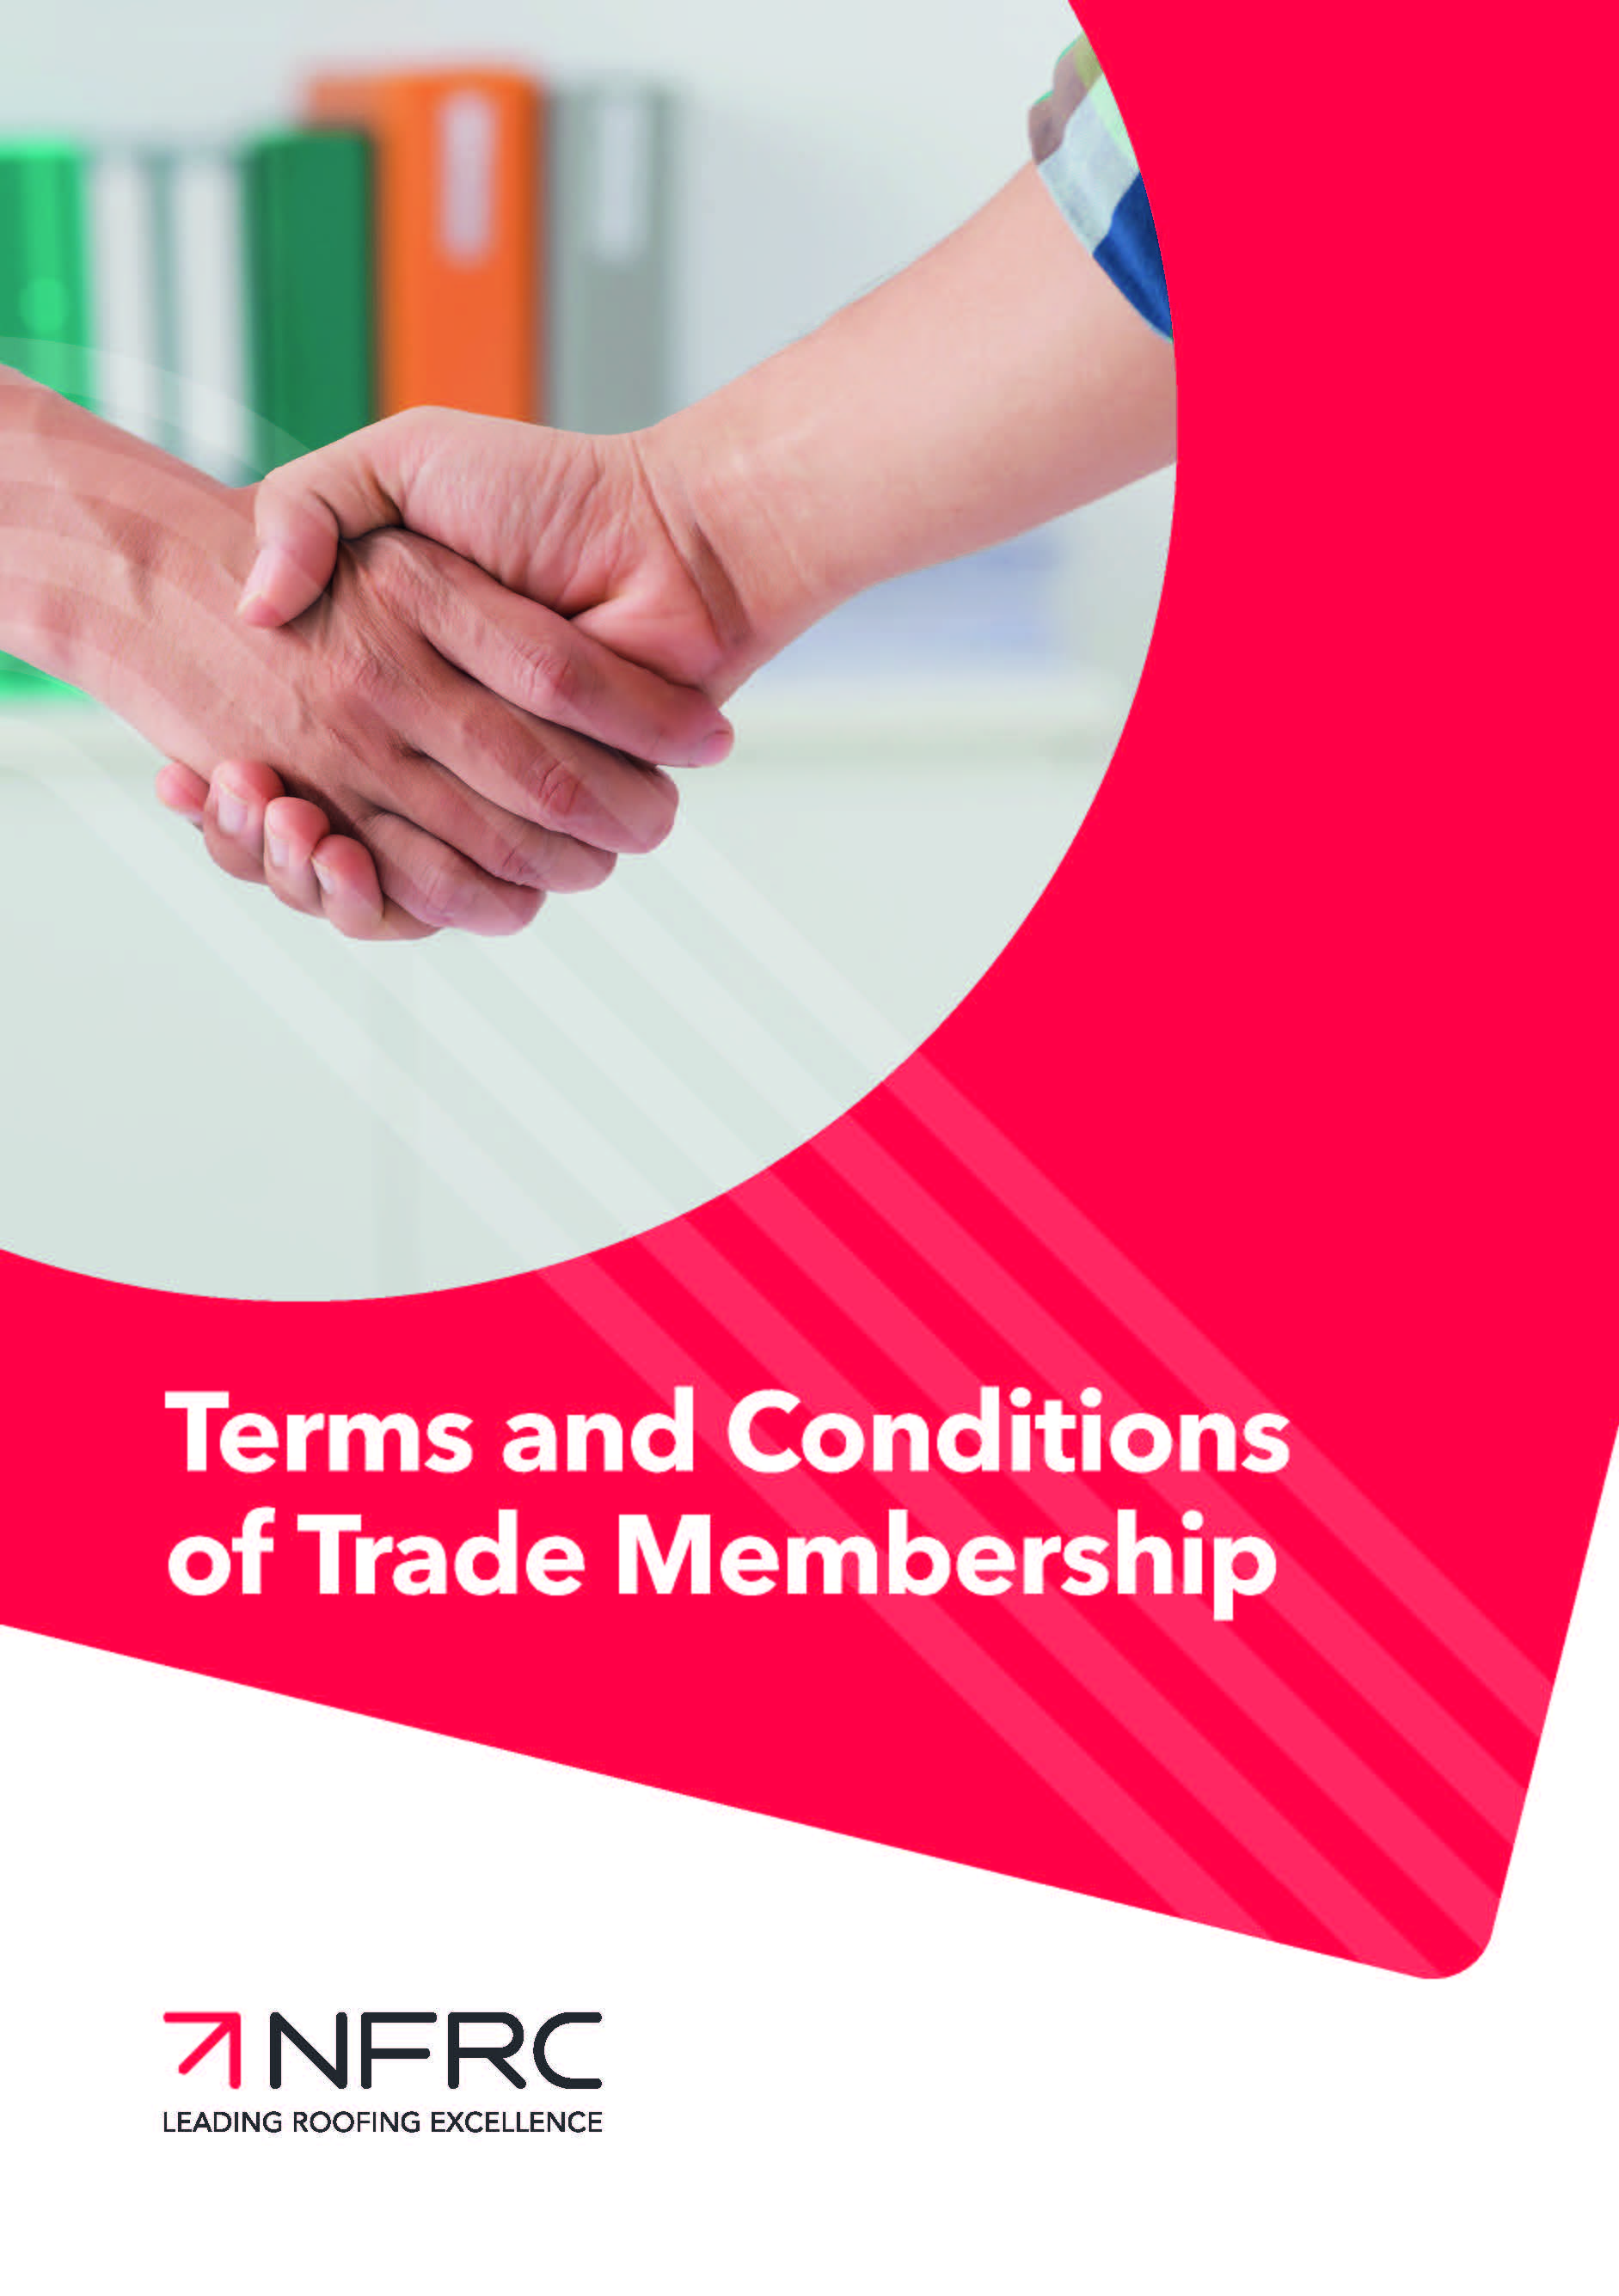 Terms and conditions of NFRC trade membership